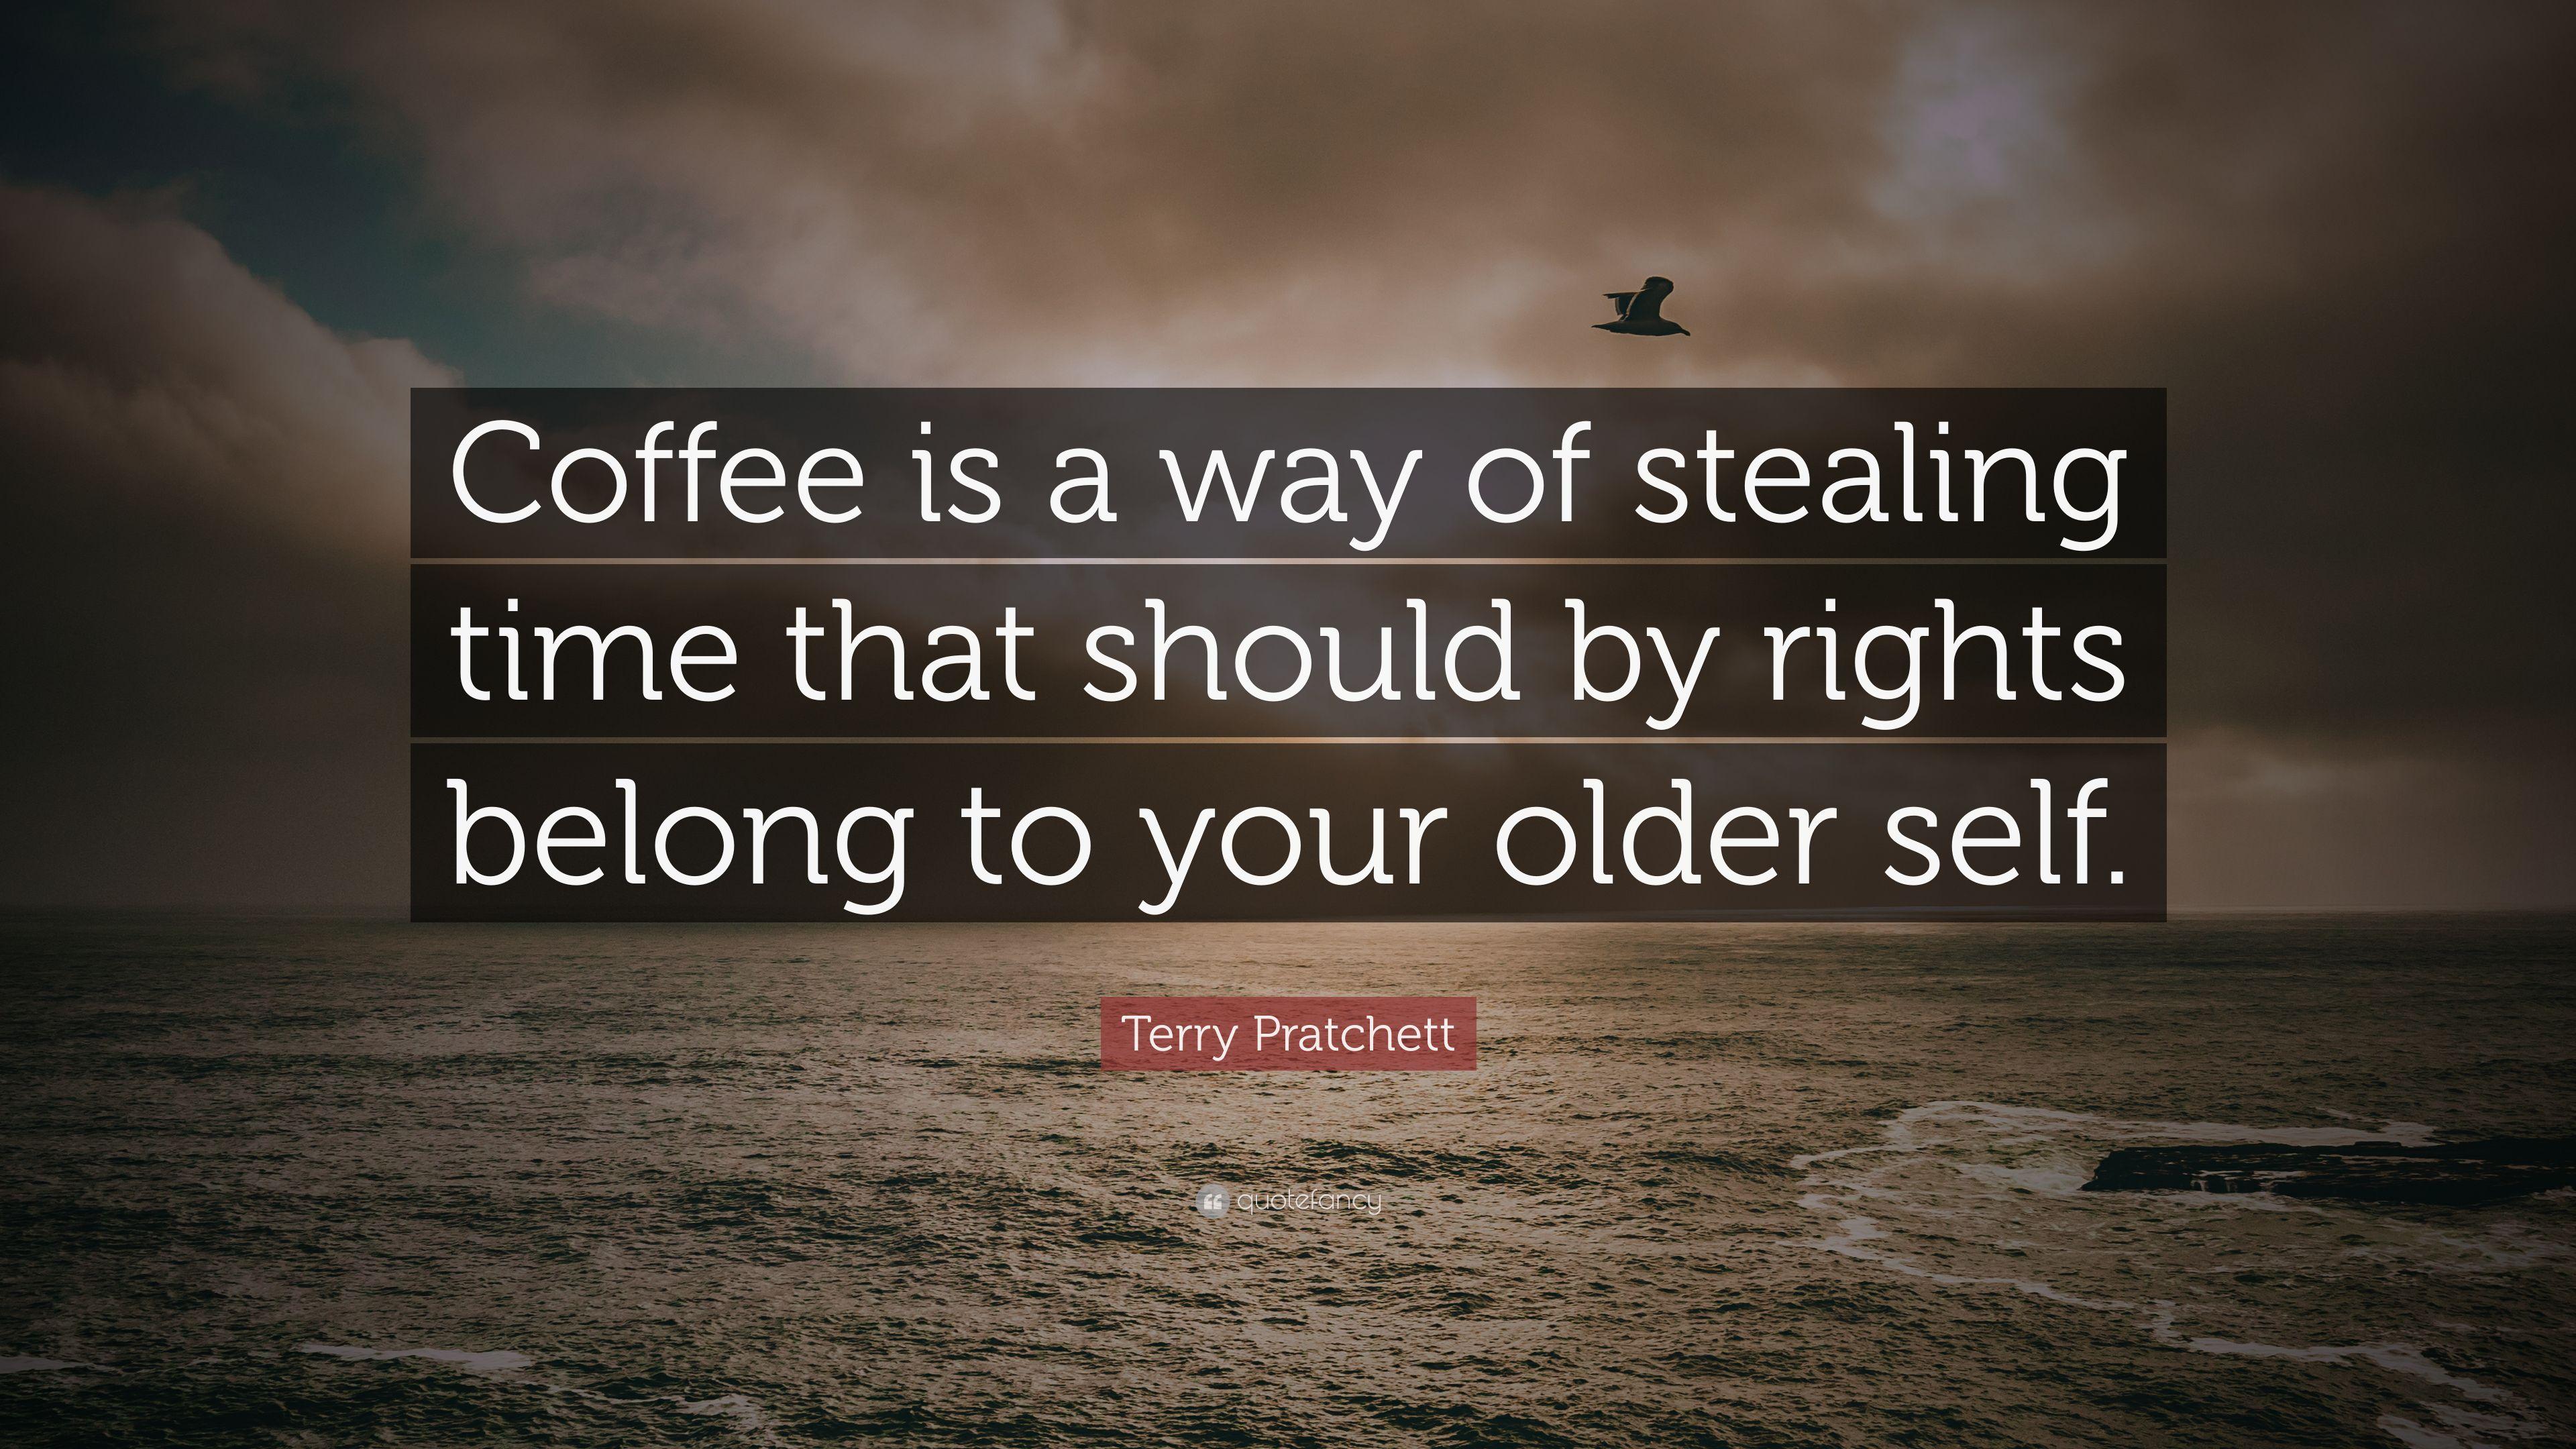 Coffee Quotes Wallpapers - Top Free Coffee Quotes Backgrounds